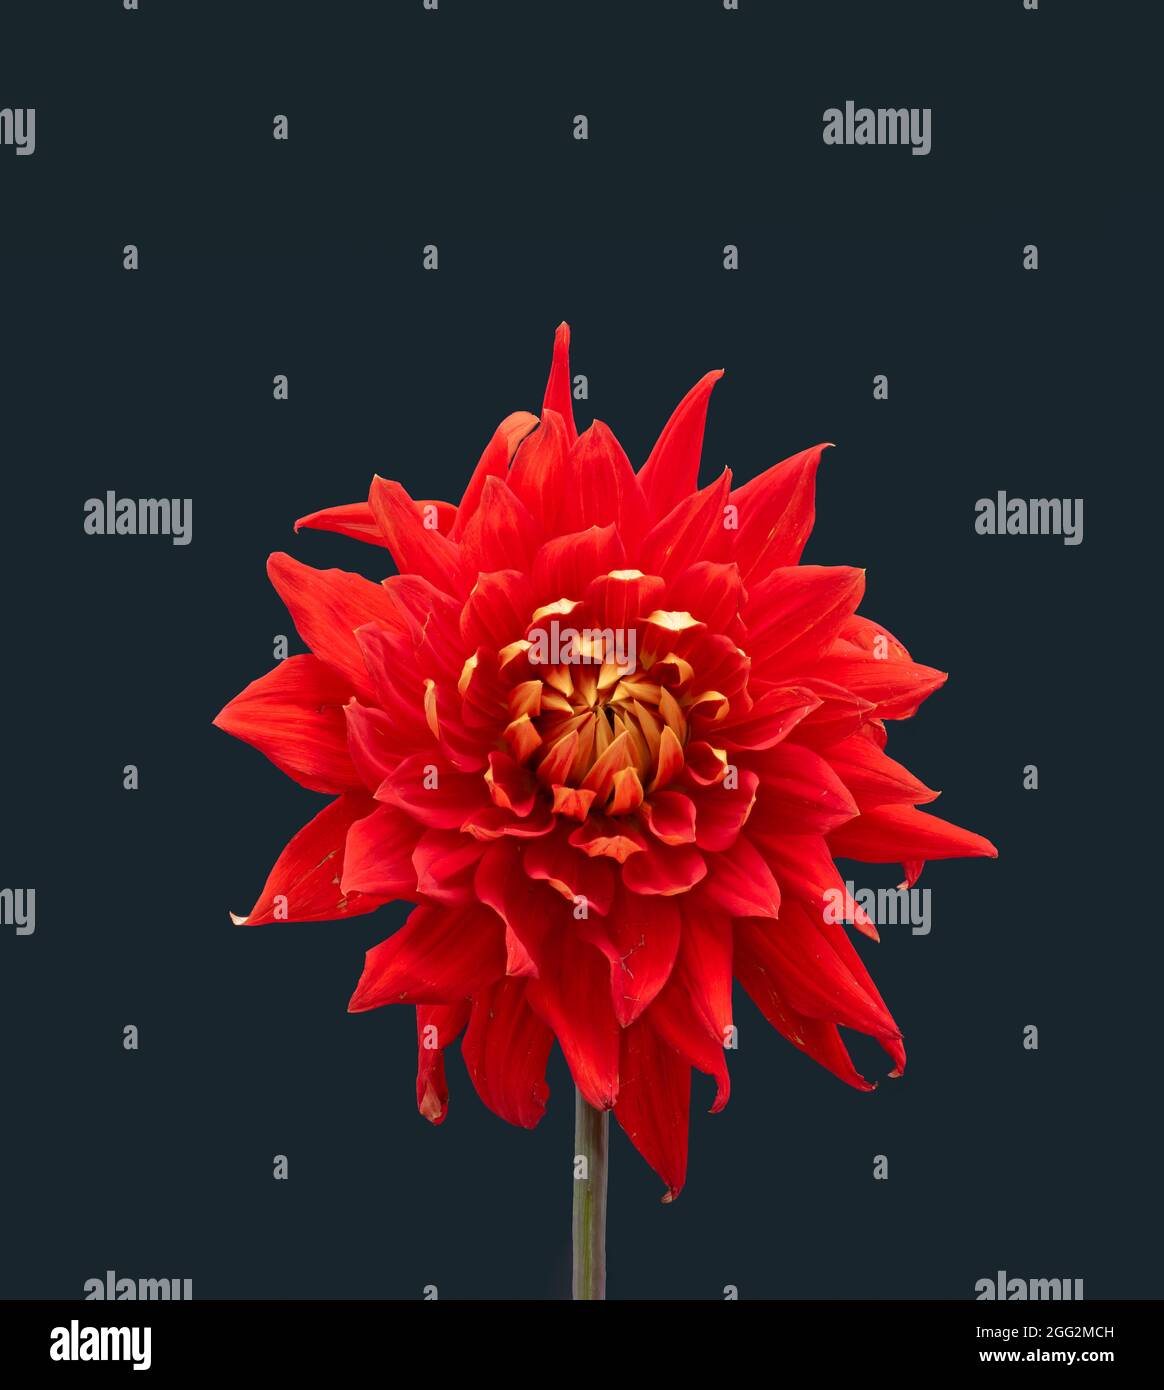 Floral fine art still life detailed color macro flower image of a single isolated blooming red dahlia on gray background Stock Photo